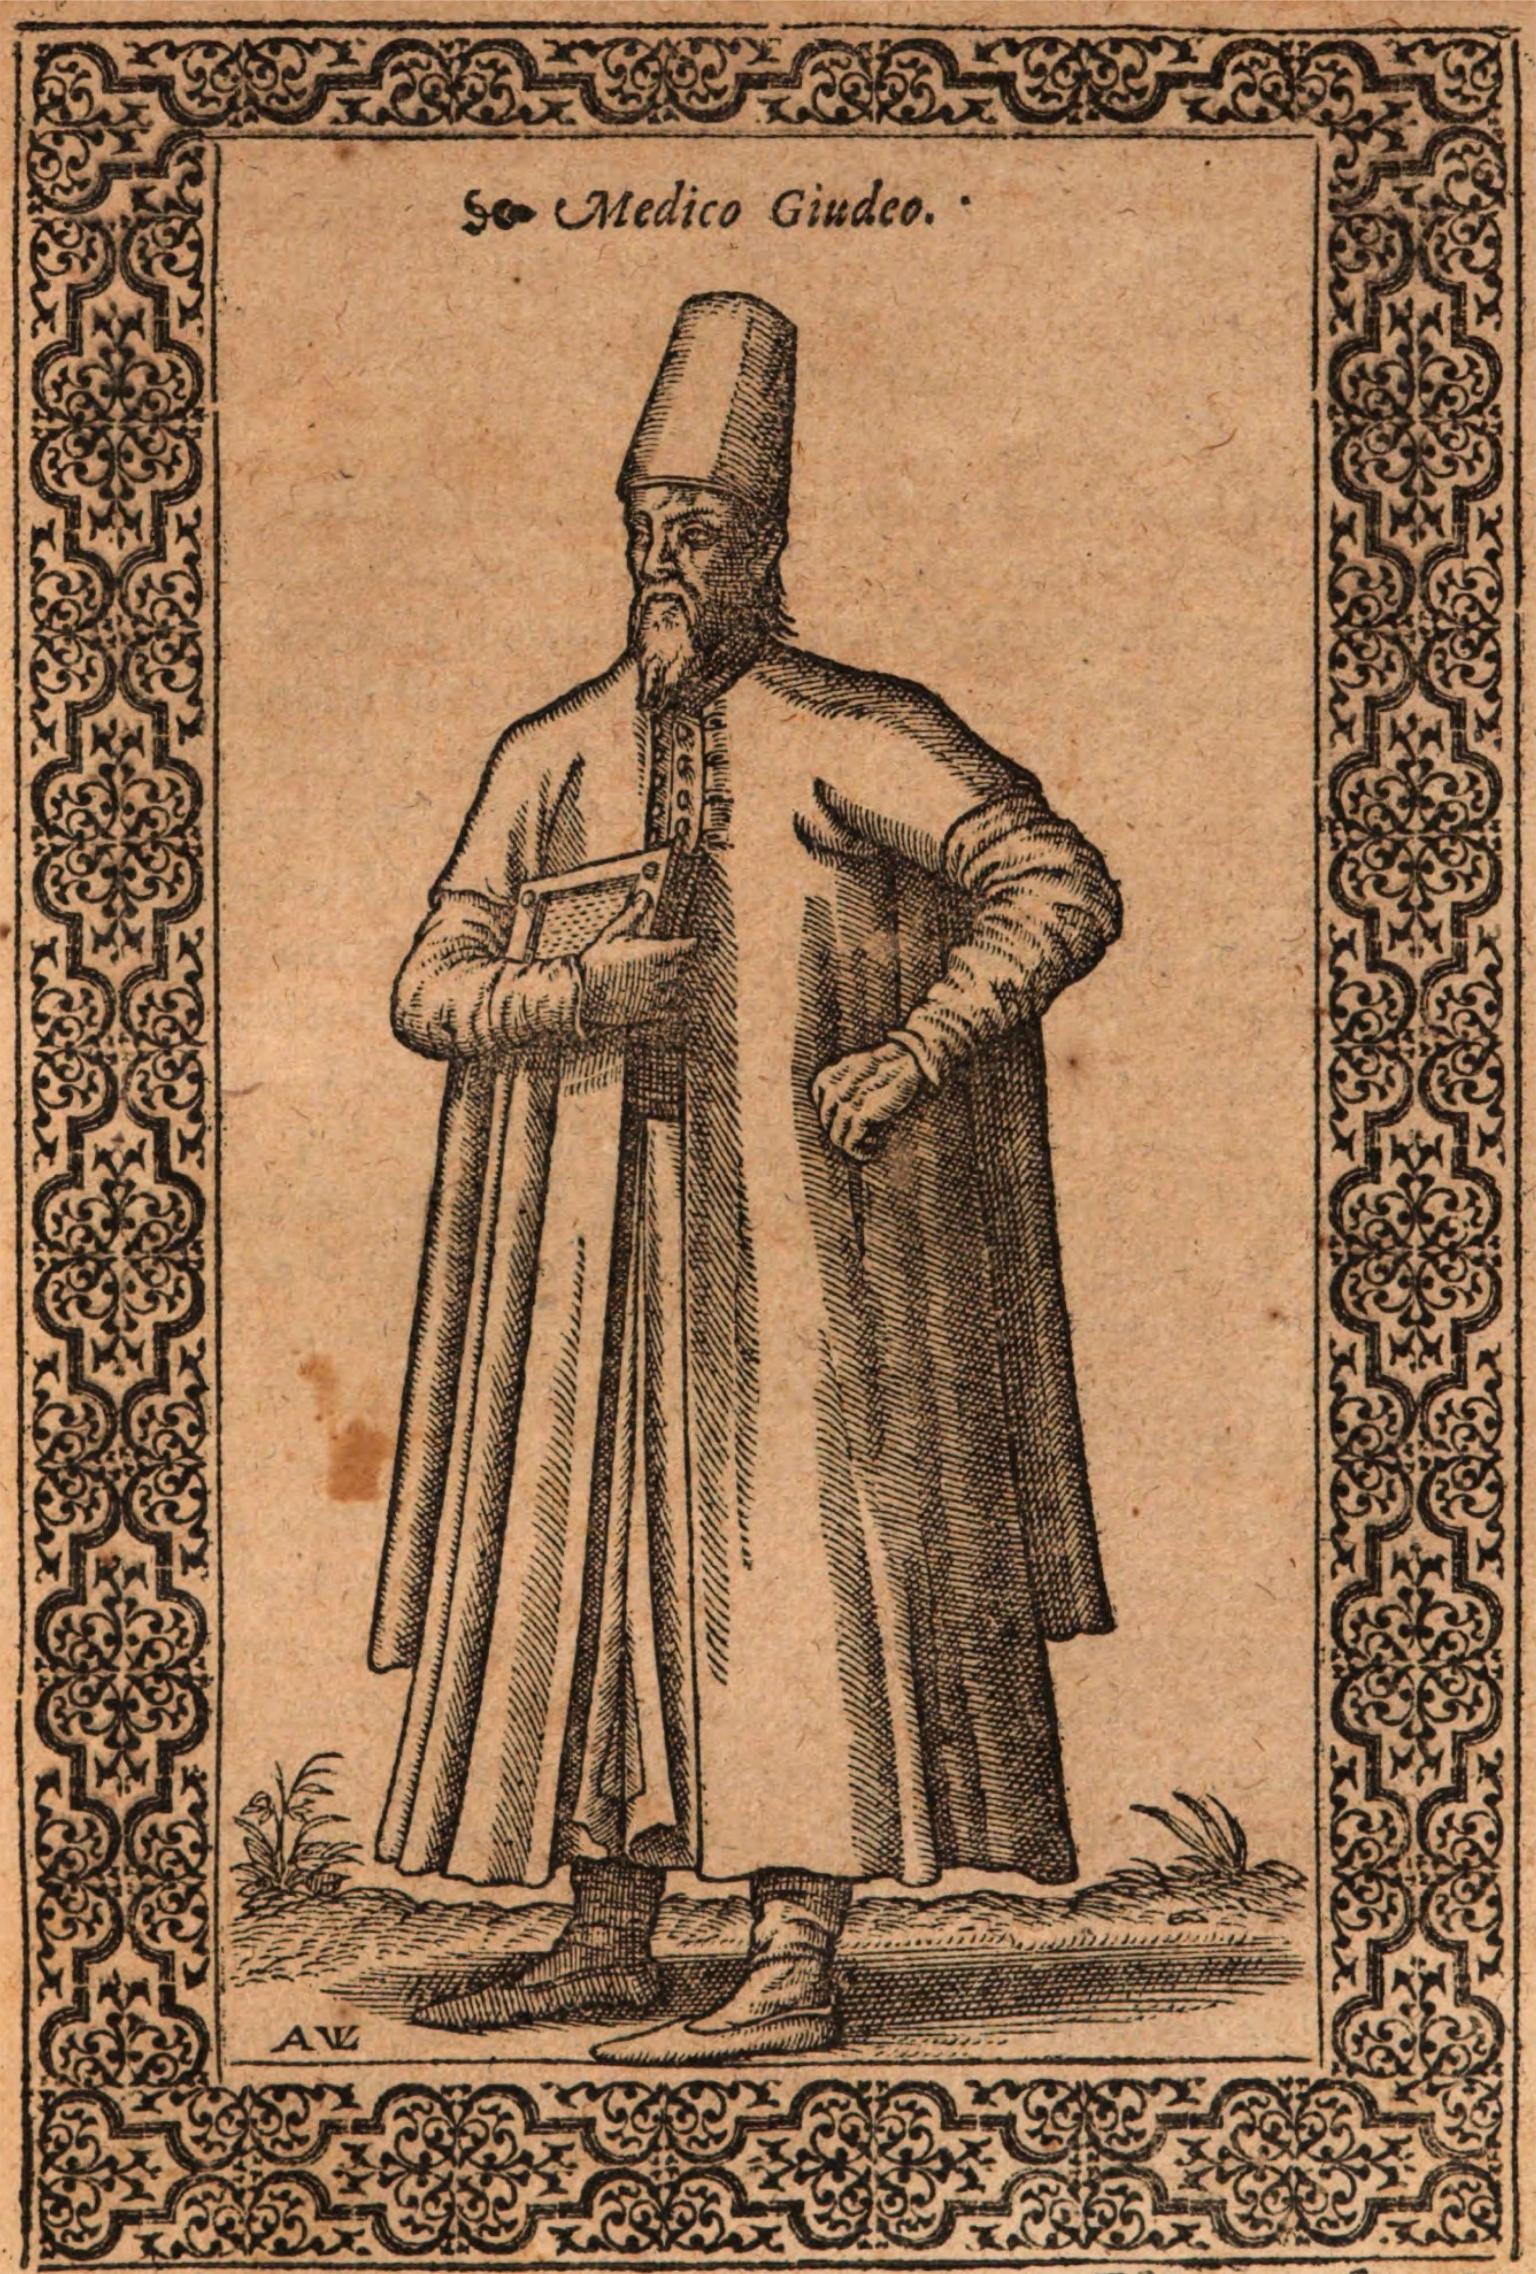 Print with decorative border of man in robes wearing hat and holding a book with right hand and Latin heading.